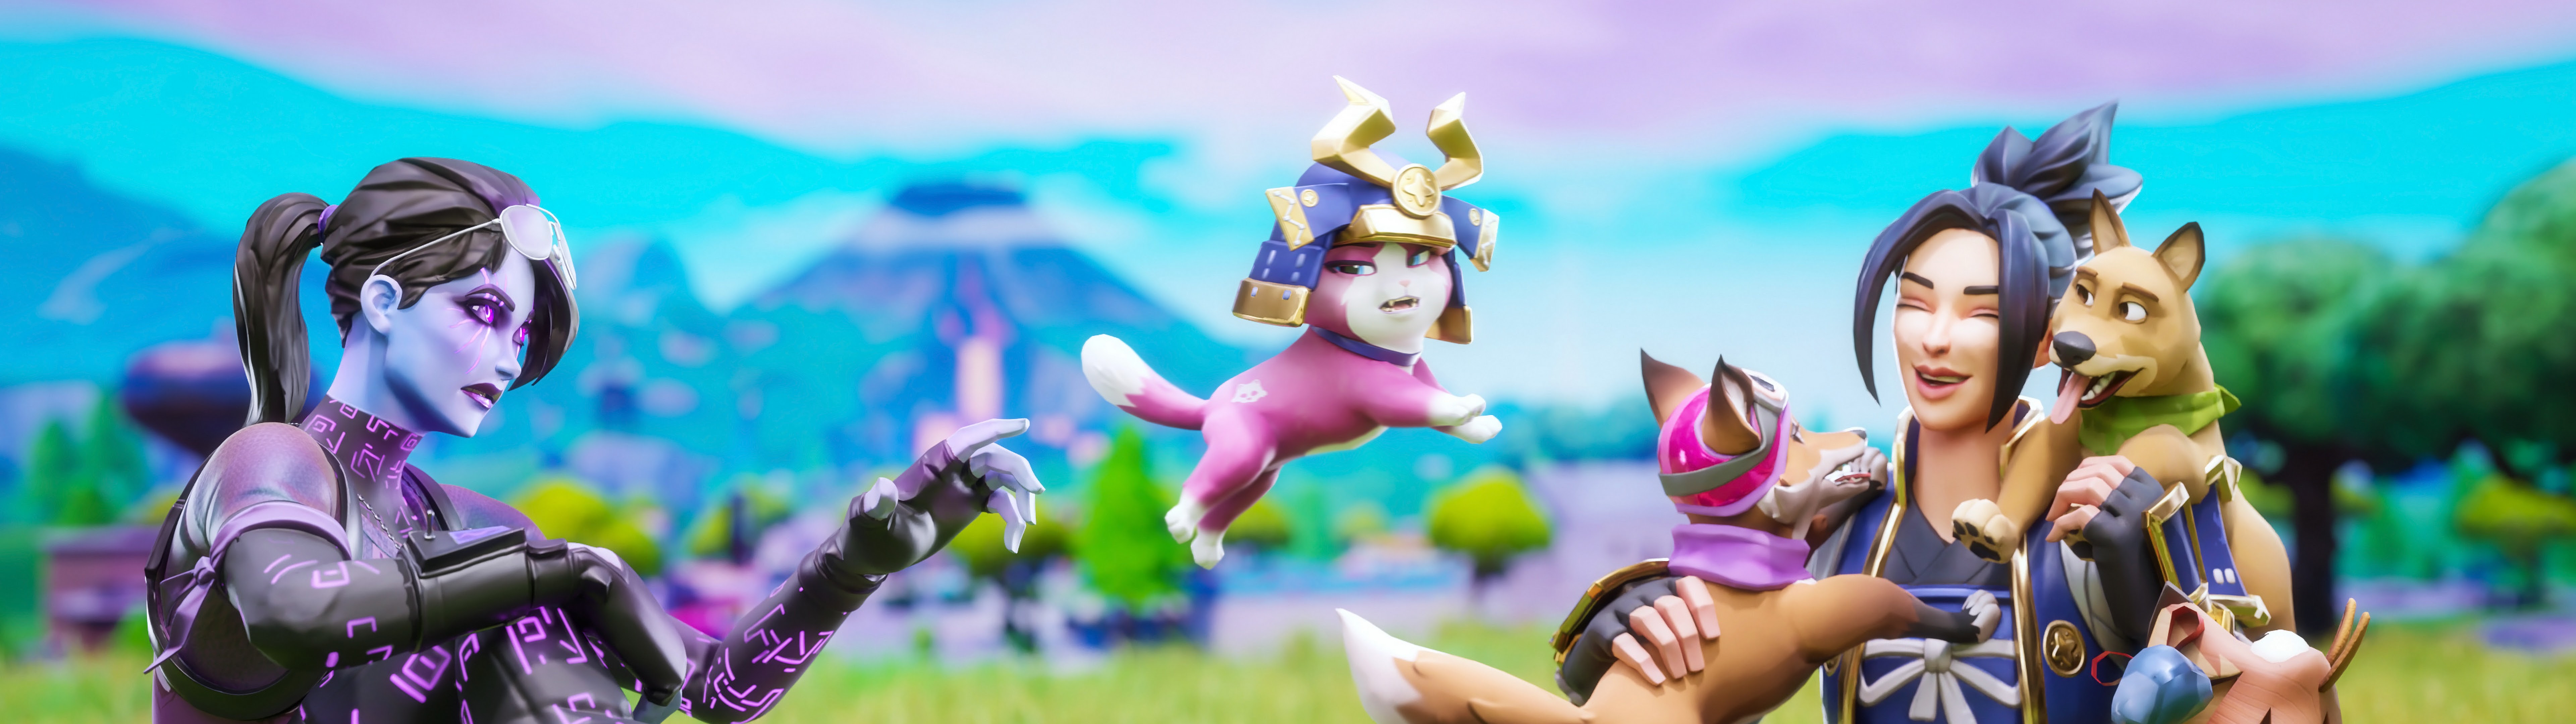 Hime Fortnite Wallpapers